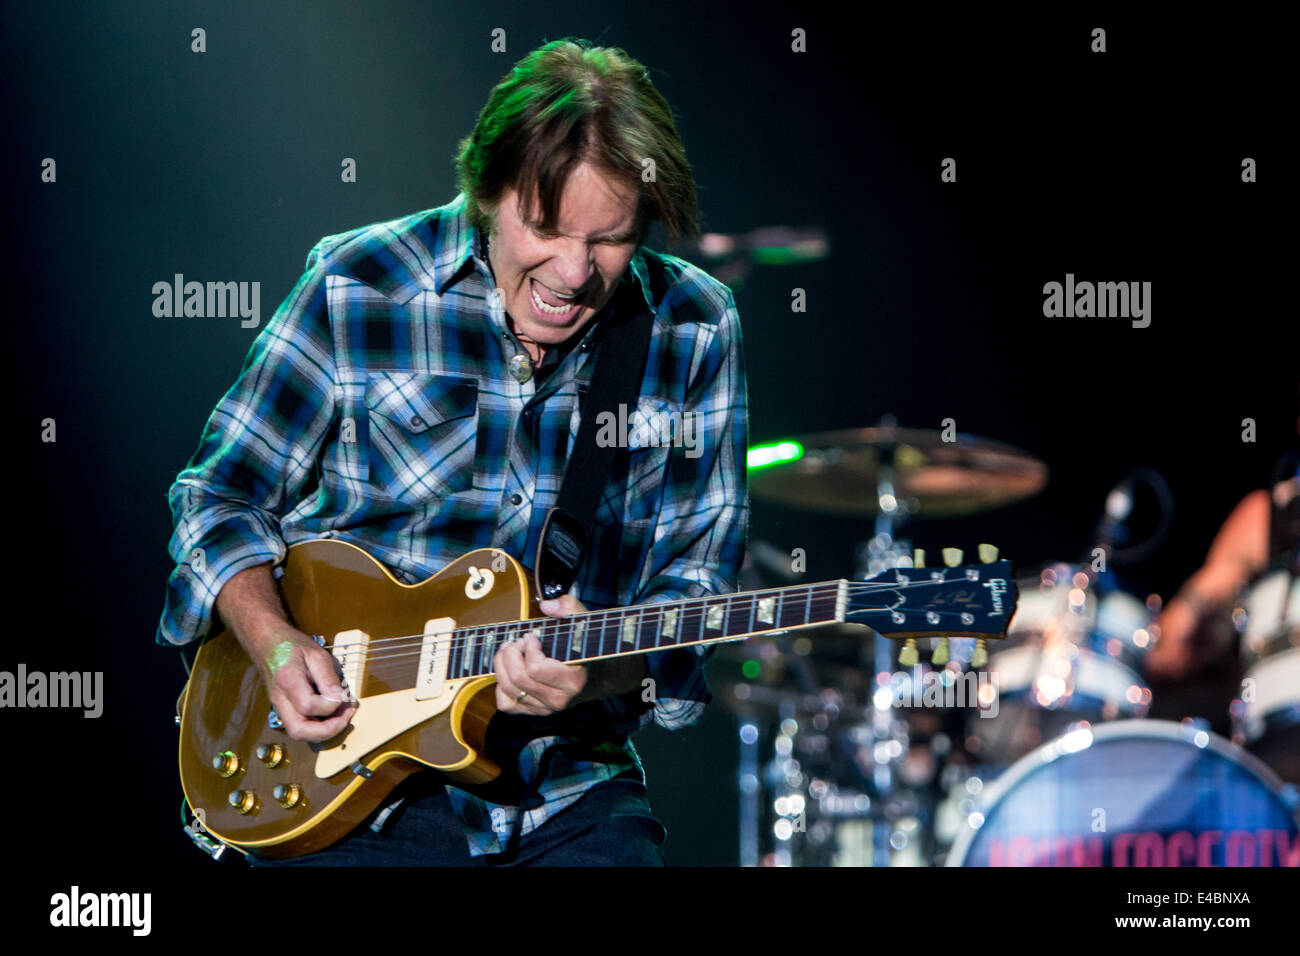 Milan Italy. 07th July 2014. The American musician songwriter and guitarist JOHN FOGERTY best known as the lead singer and lead guitarist for the band Creedence Clearwater Revival performs live at Ippodromo del Galoppo during the 'City Sound Milano' Credit:  Rodolfo Sassano/Alamy Live News Stock Photo